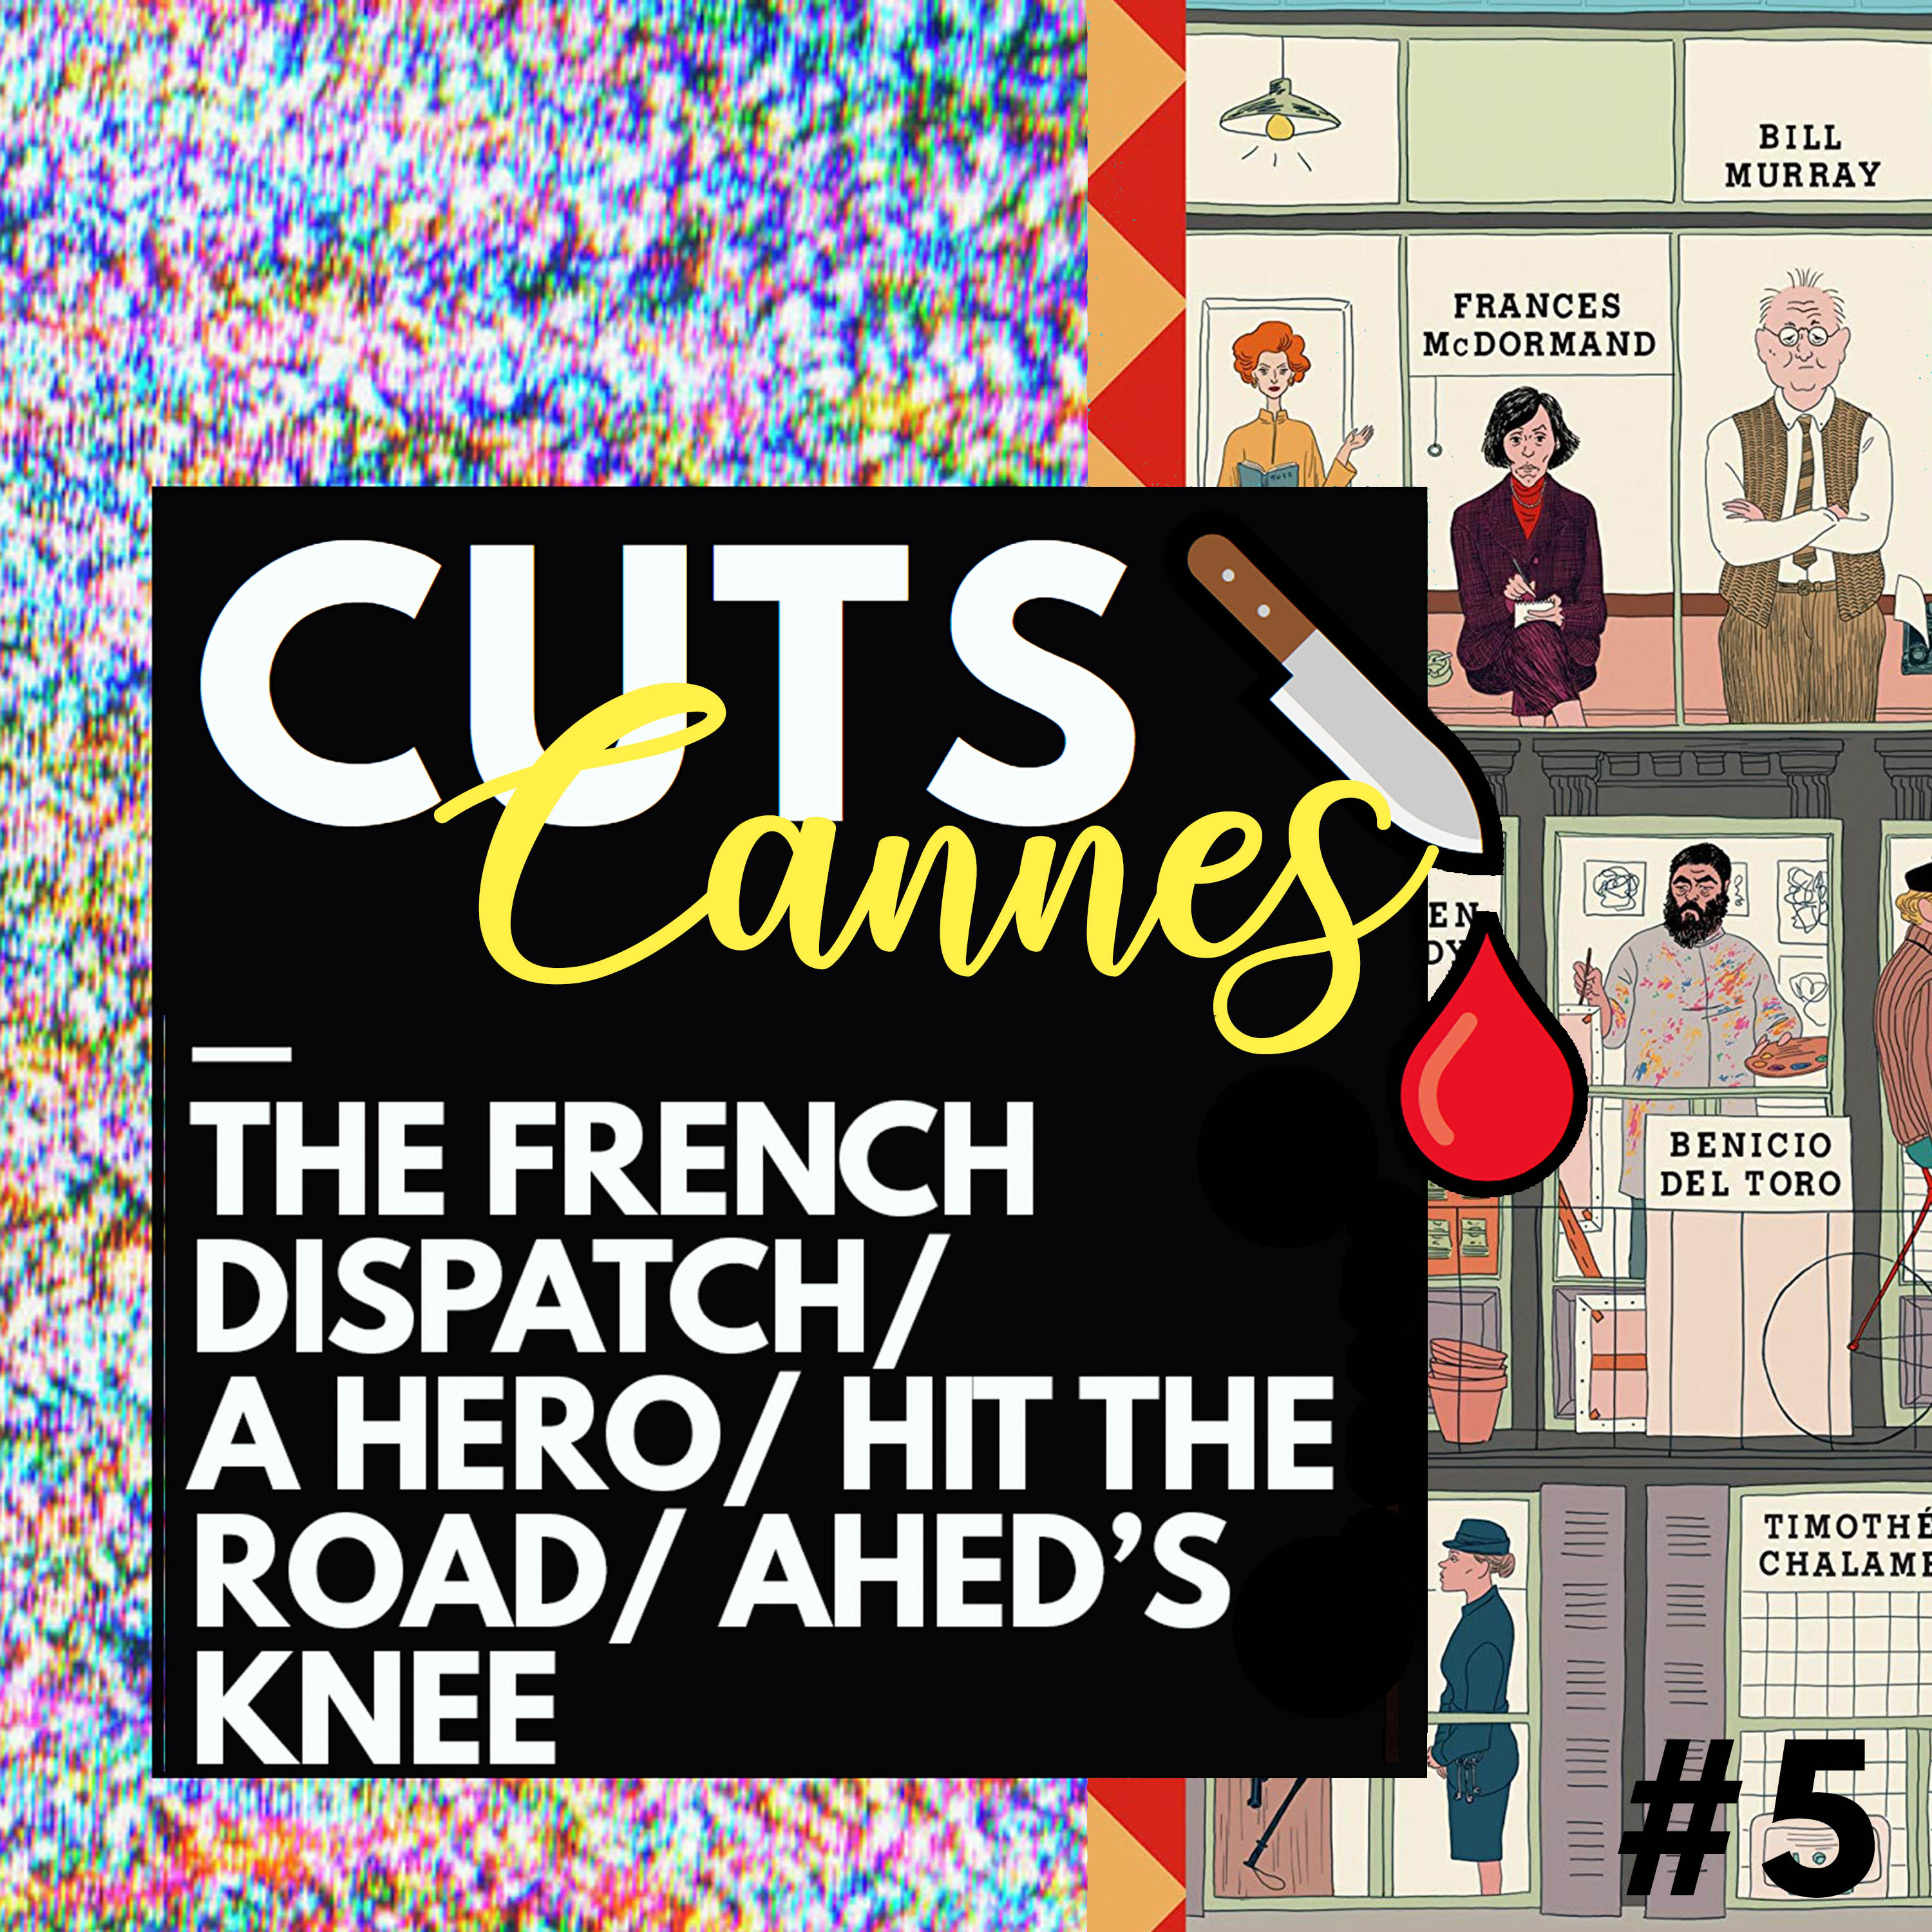 Cannes #5 - The French Dispatch, A Hero, Hit the Road, Ahed's Knee